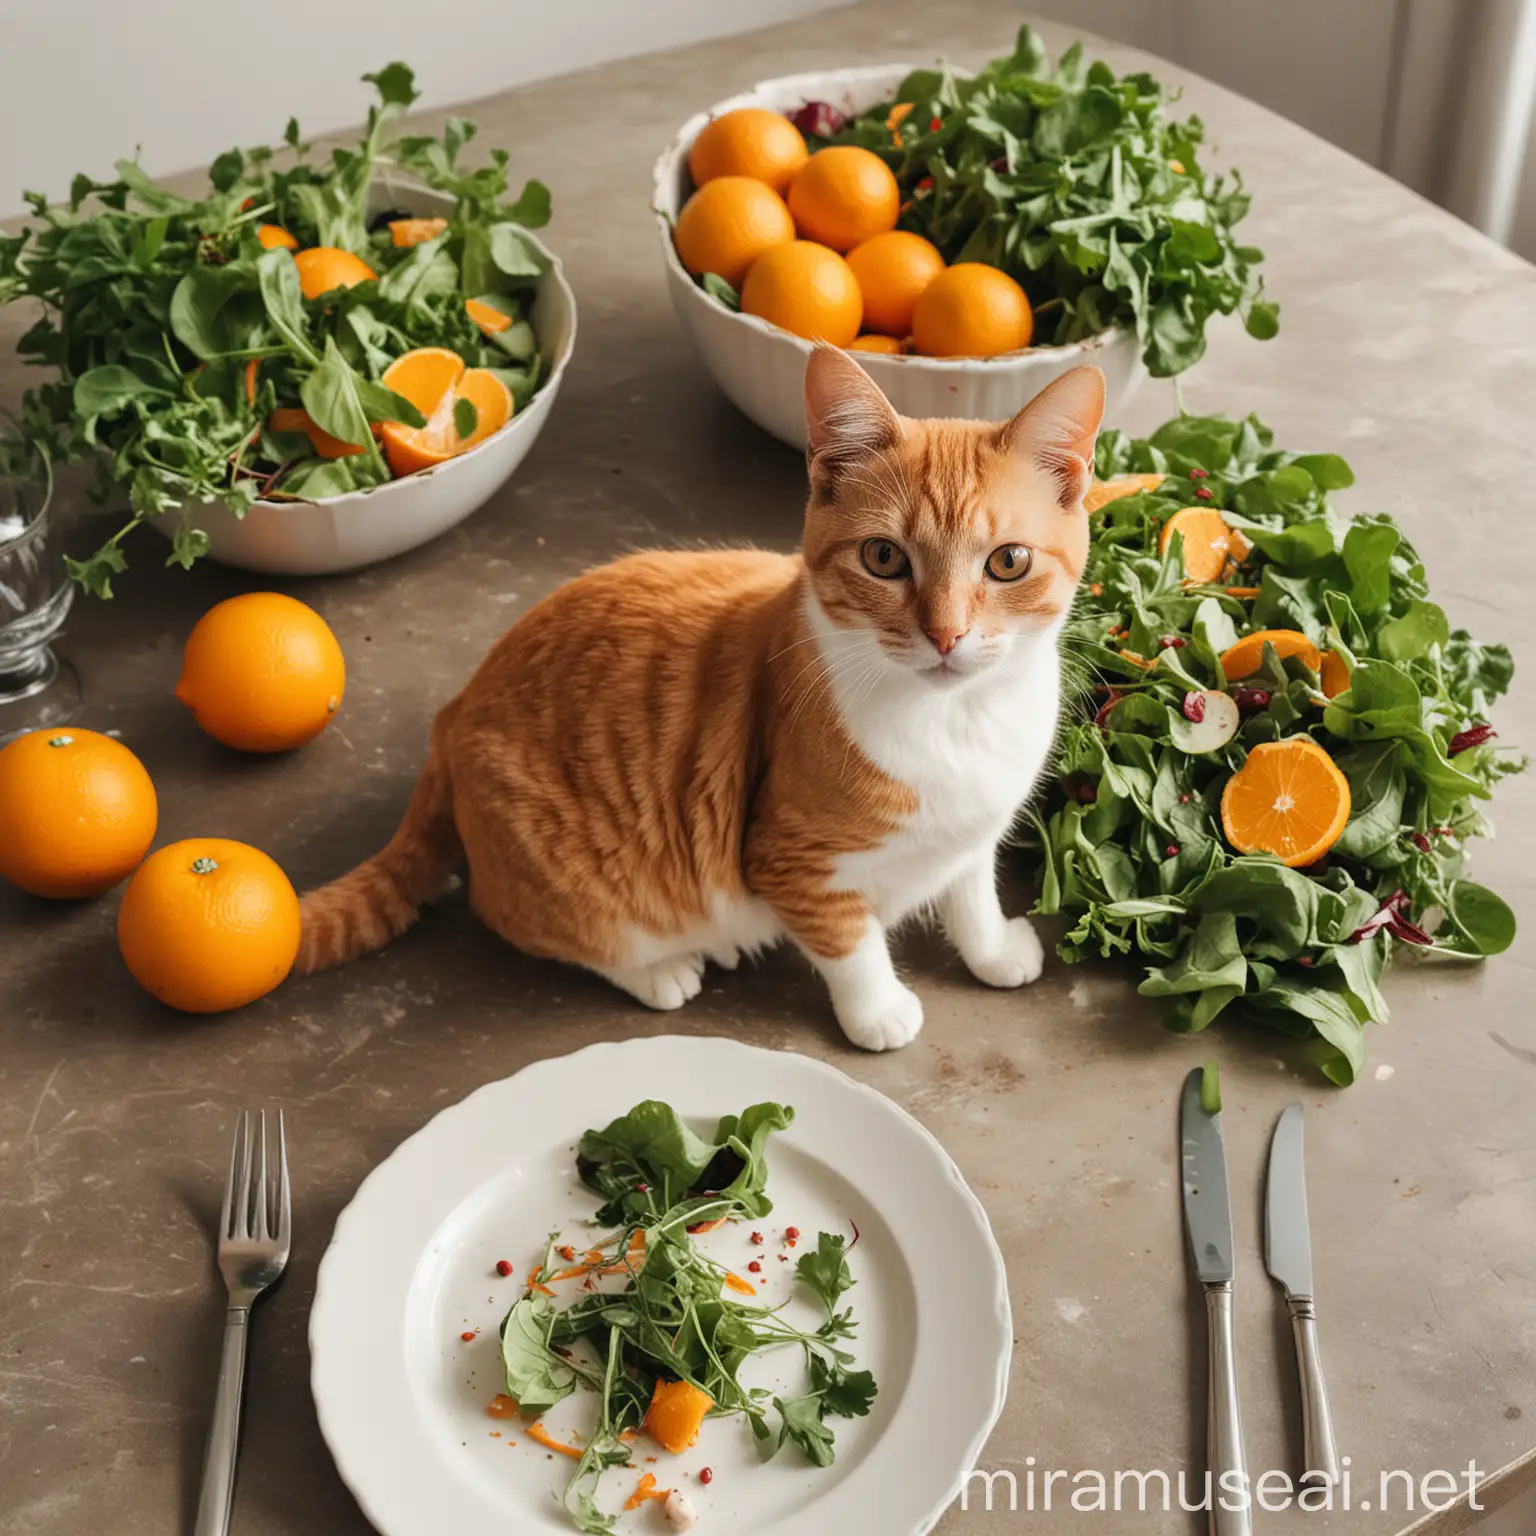 Curious Cat on Dining Table Amid Salad and Warm Orange Tones